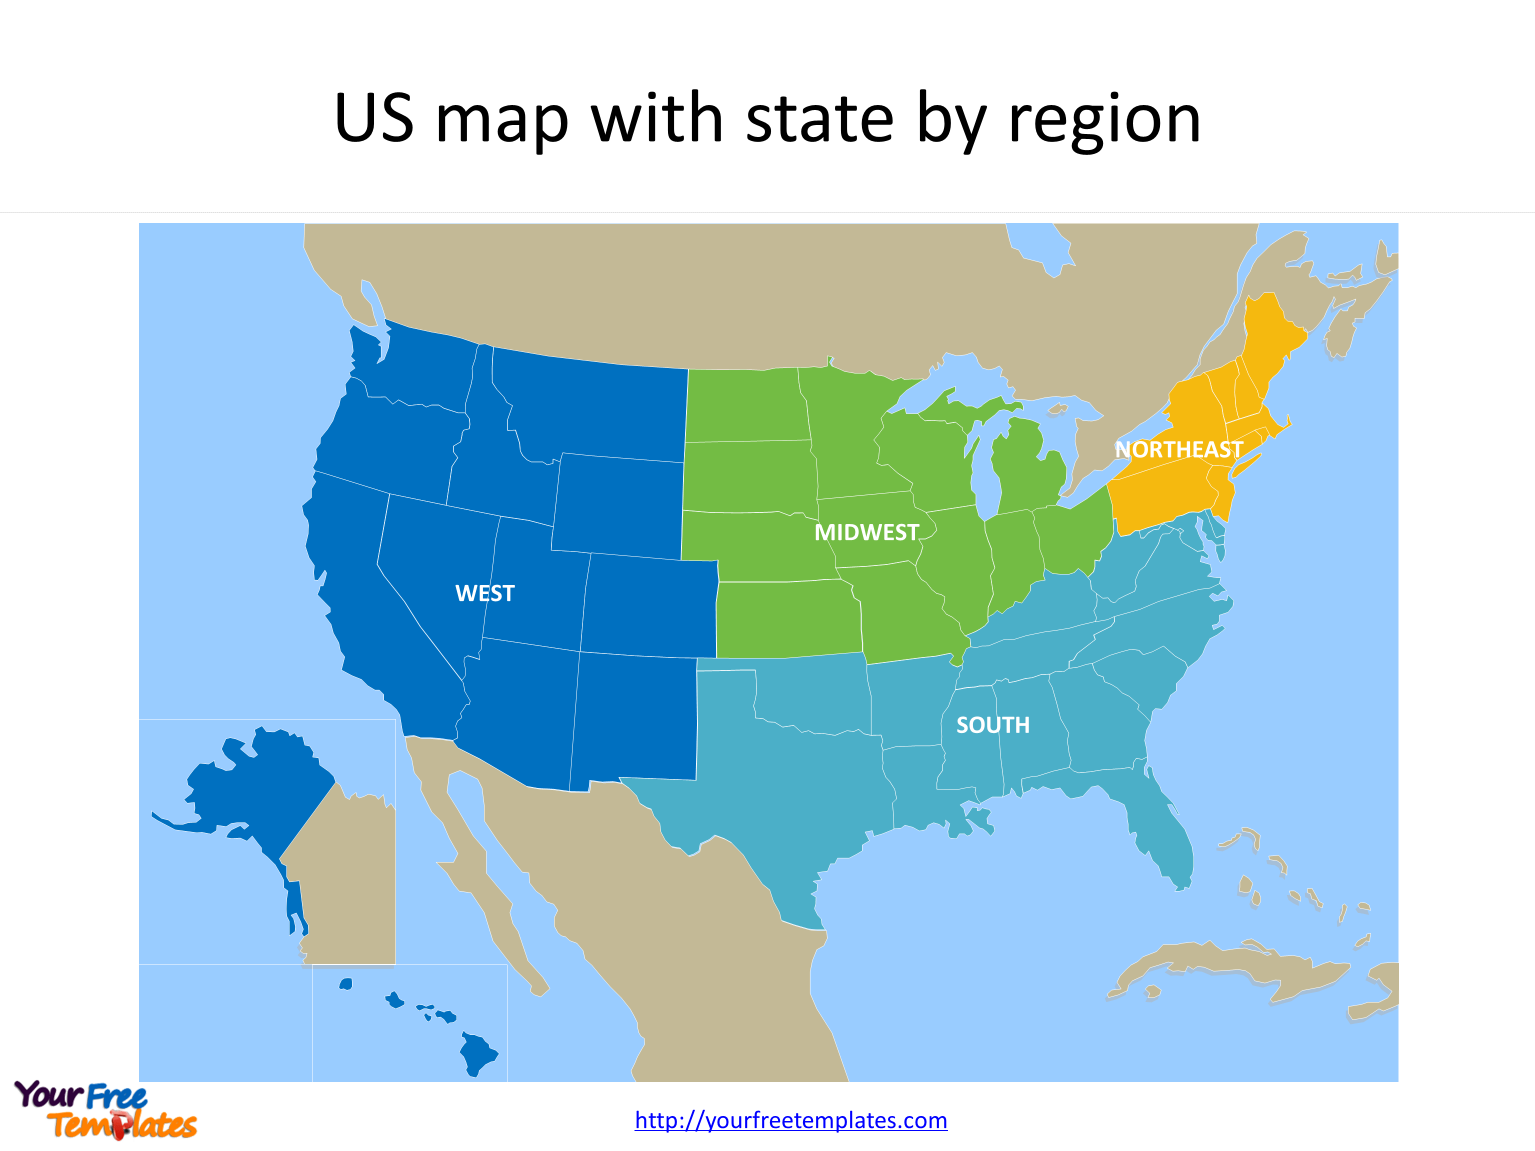 US map with state names of two-letter abbreviation